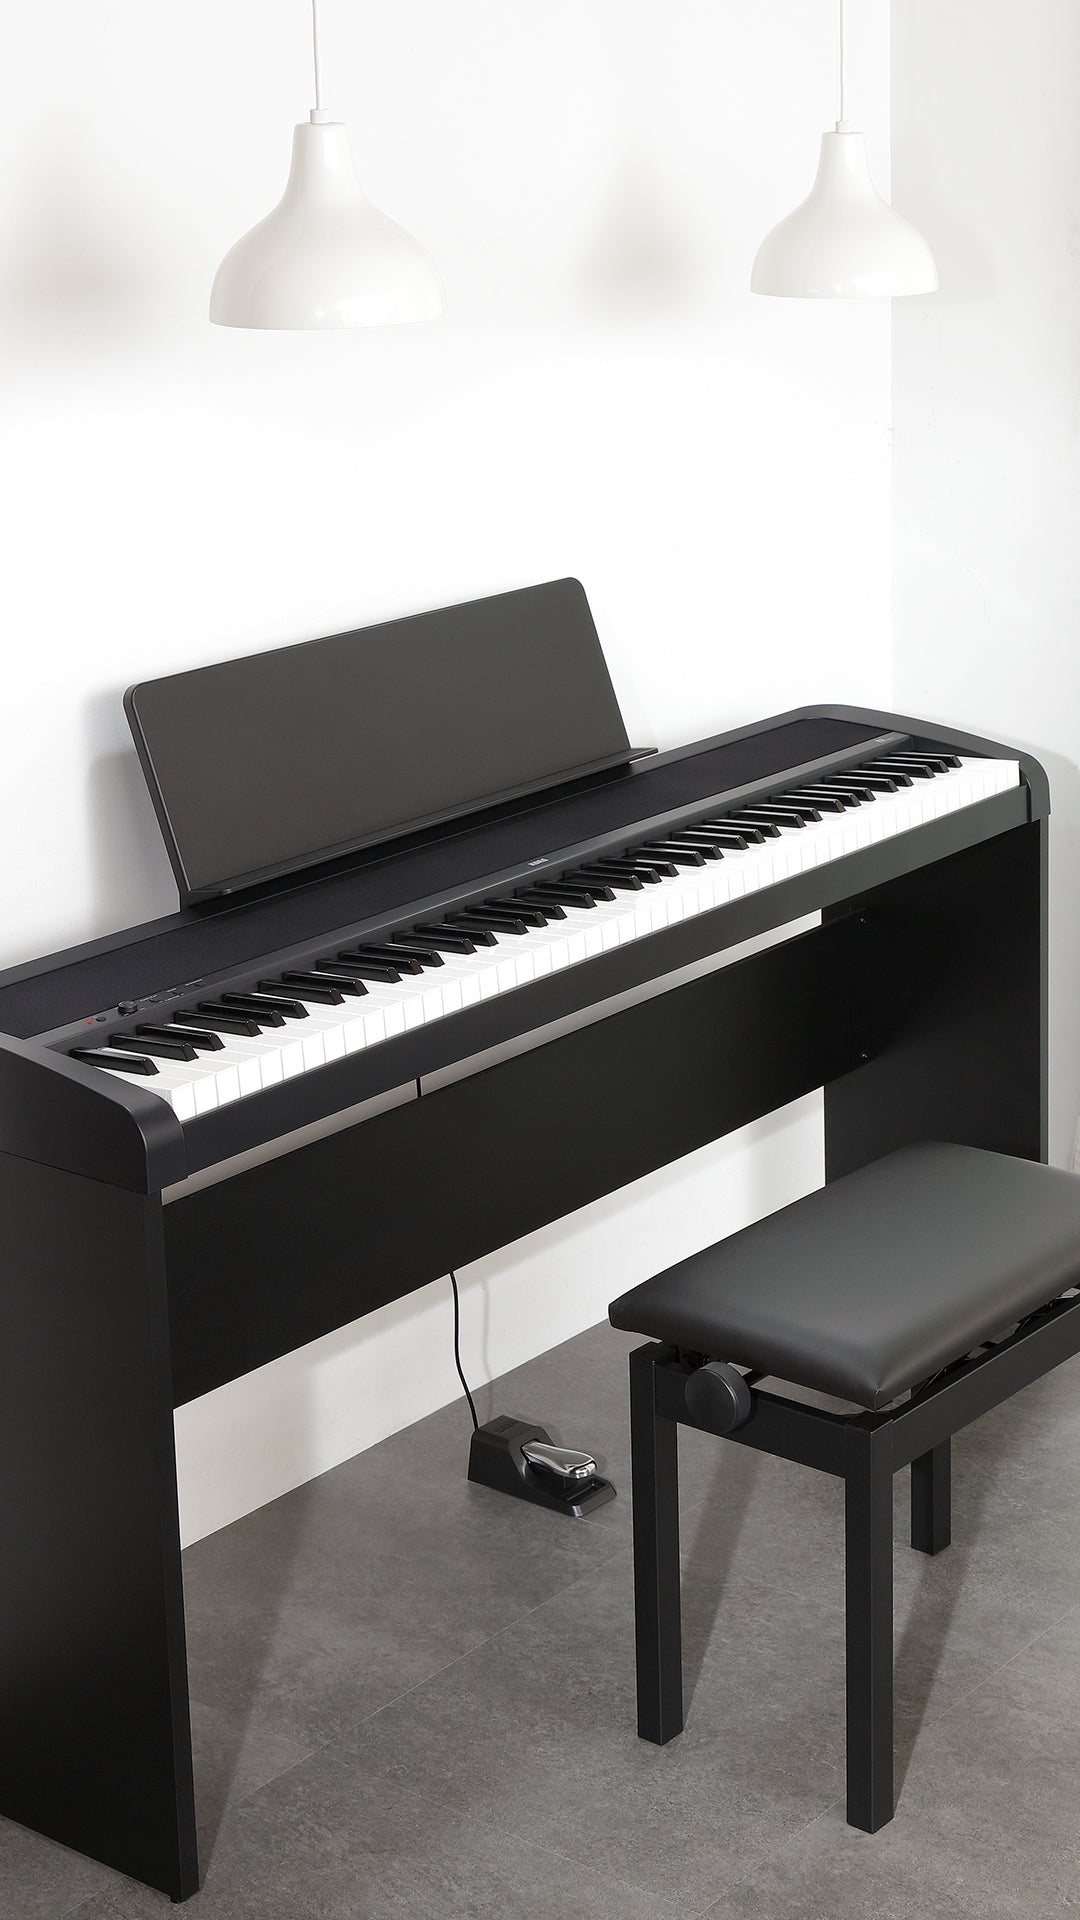 KORG B2 digital piano with stand pack